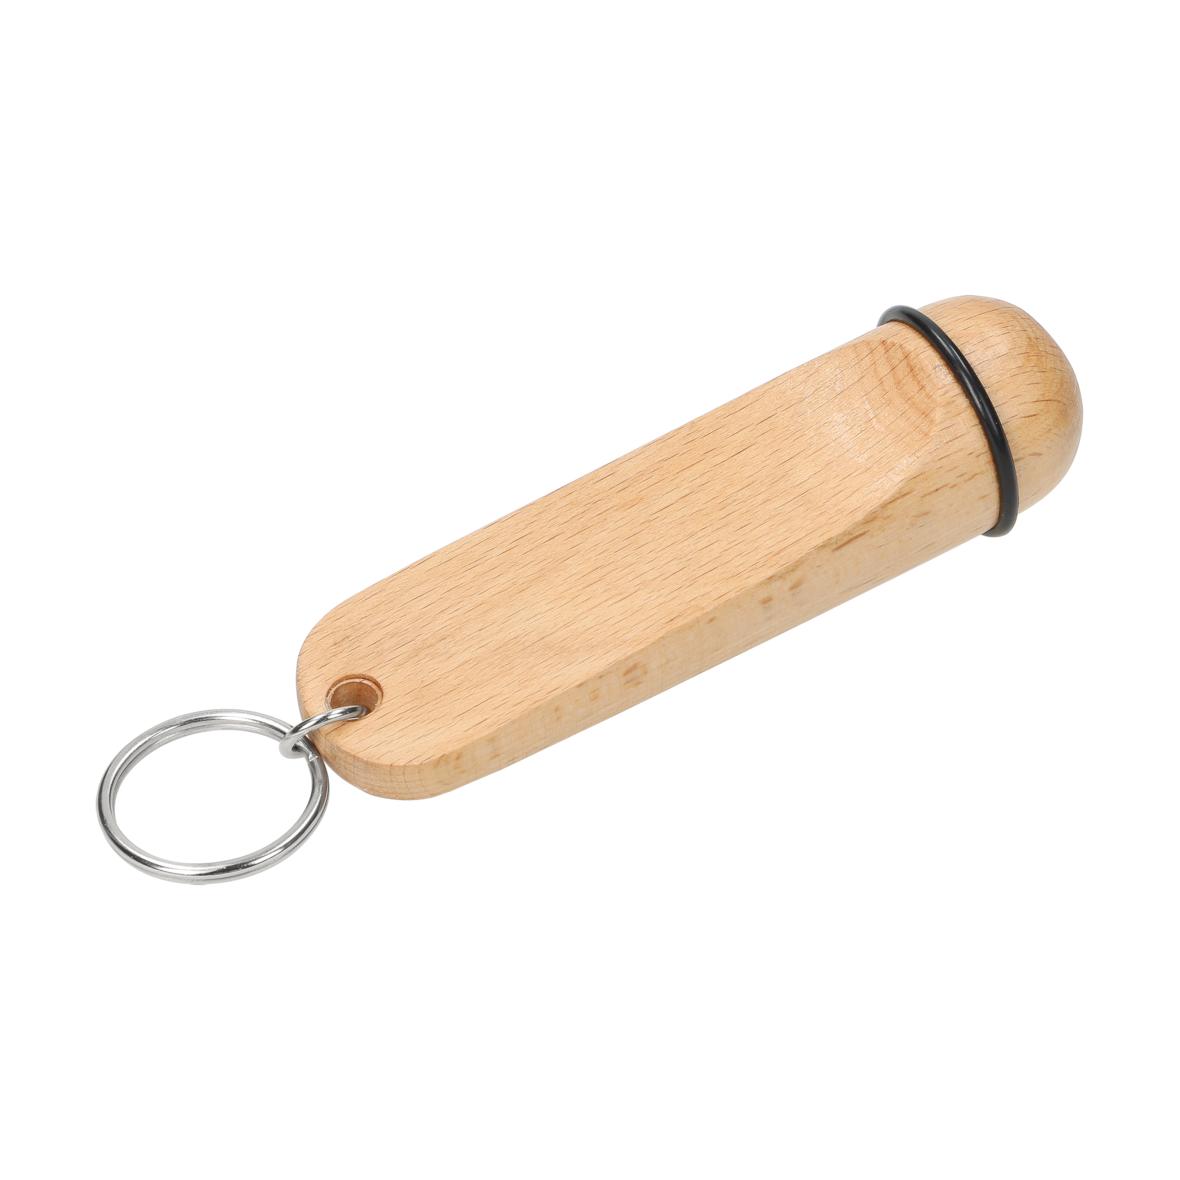 Classic Beech Wood Hotel Keyfob with Rubber Ring - Reddish